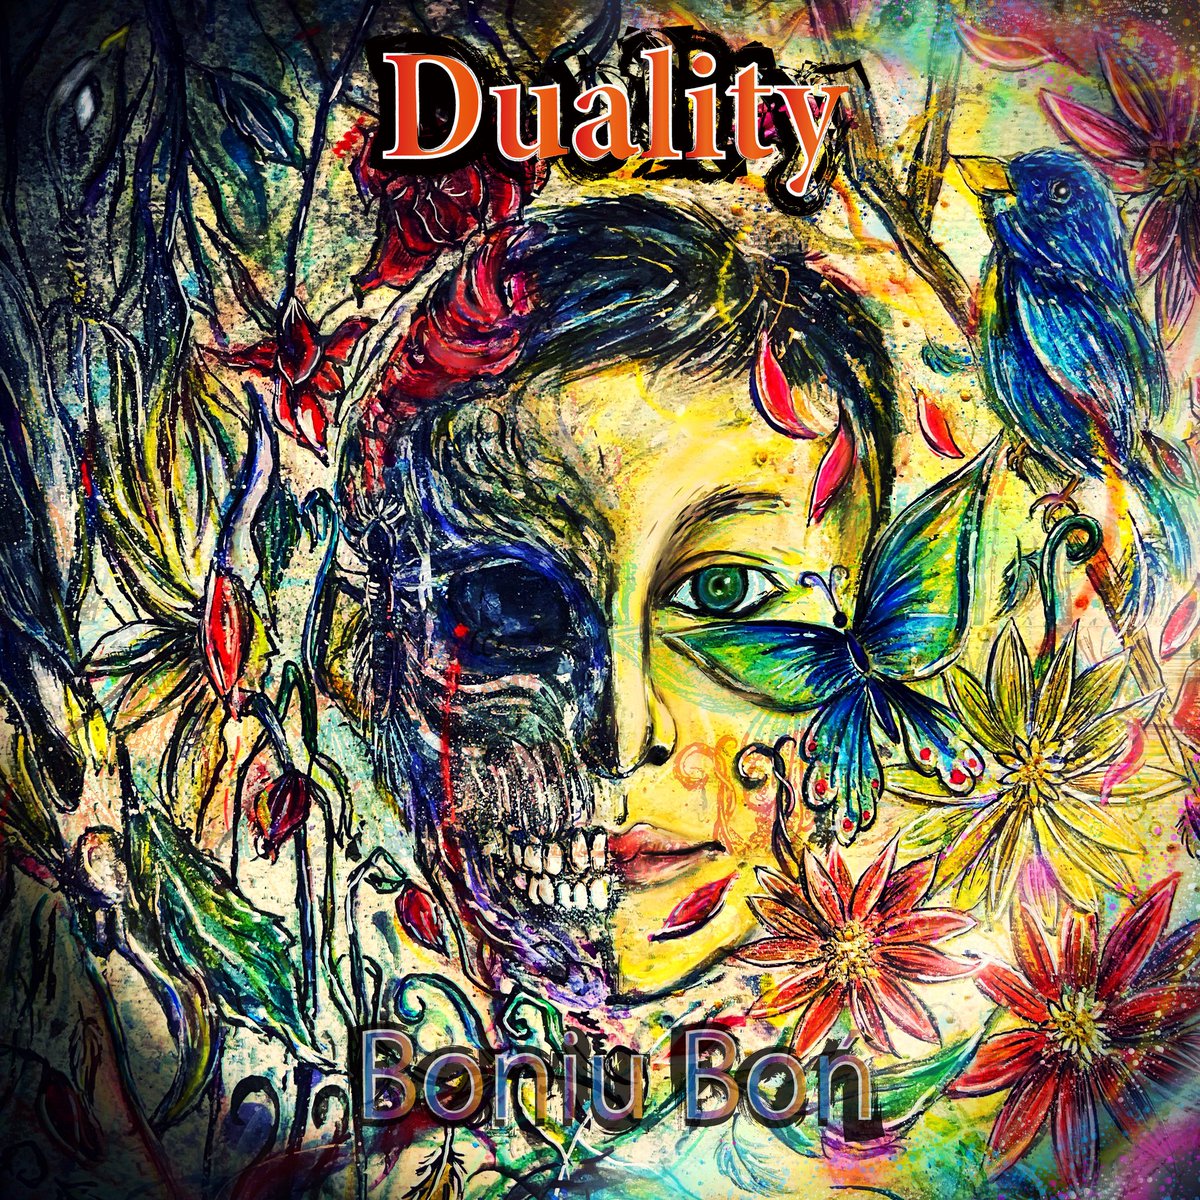 [Album Release/アルバムリリース] A year and a half of work completed, I am pleased to present my new album “Duality”. A mix of different genres of electronic music, enriched with a bit of pop and rap. Take a listen! Available for download (or purchase) at Bandcamp:…